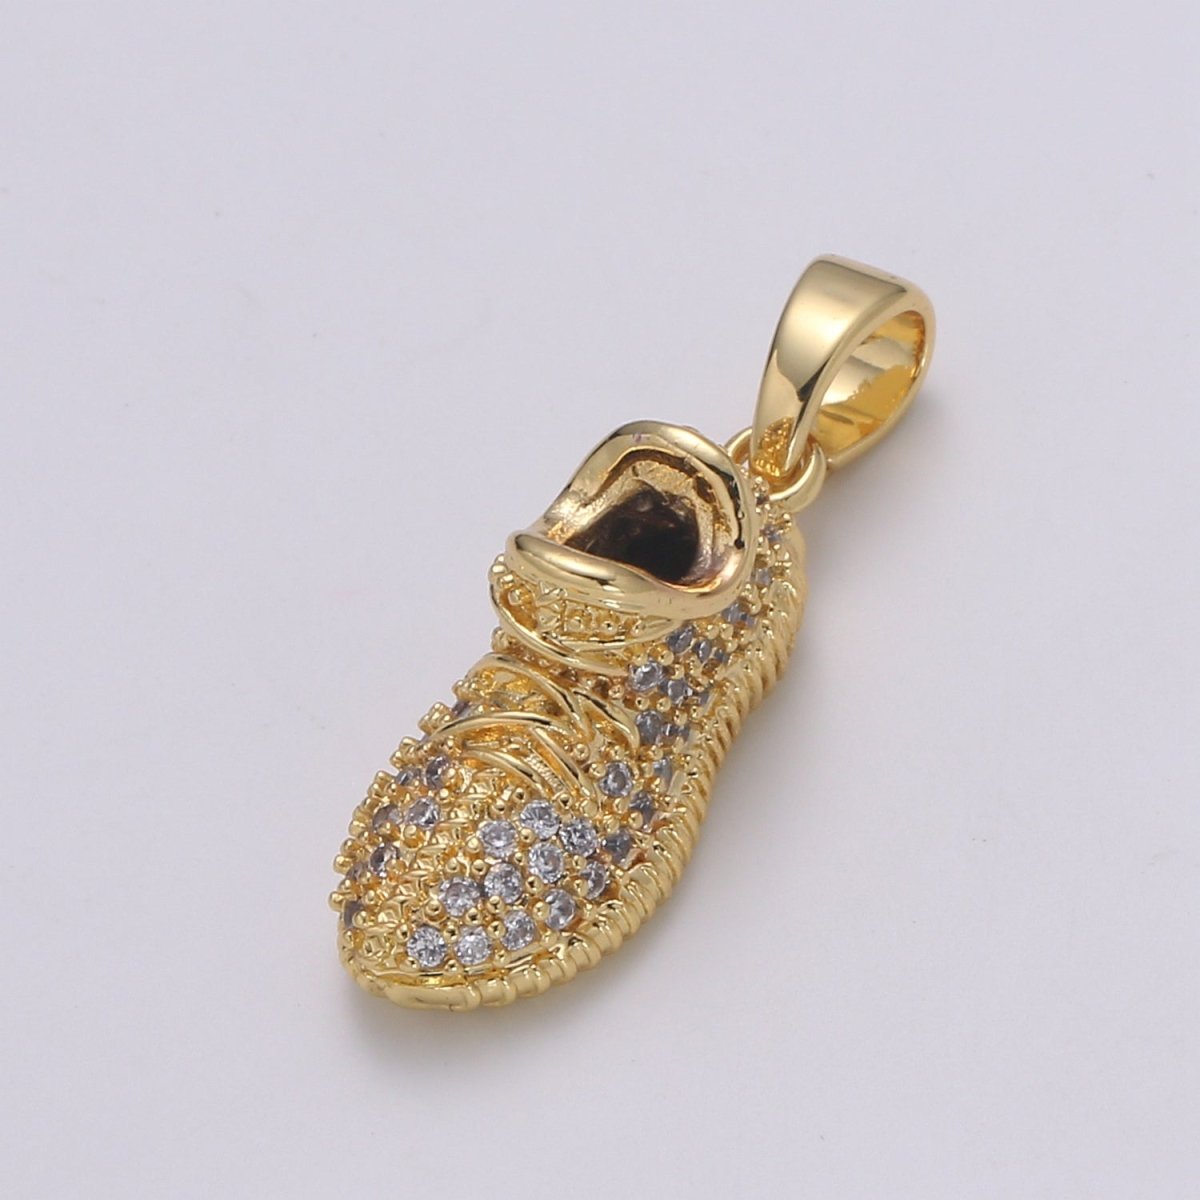 Blue or Clear Sneaker 24K Gold Charm, Micro Pave Shoes Pendant, CZ Gold Charm, Dainty Minimalist Jewelry Supply H-248 H-249 - DLUXCA